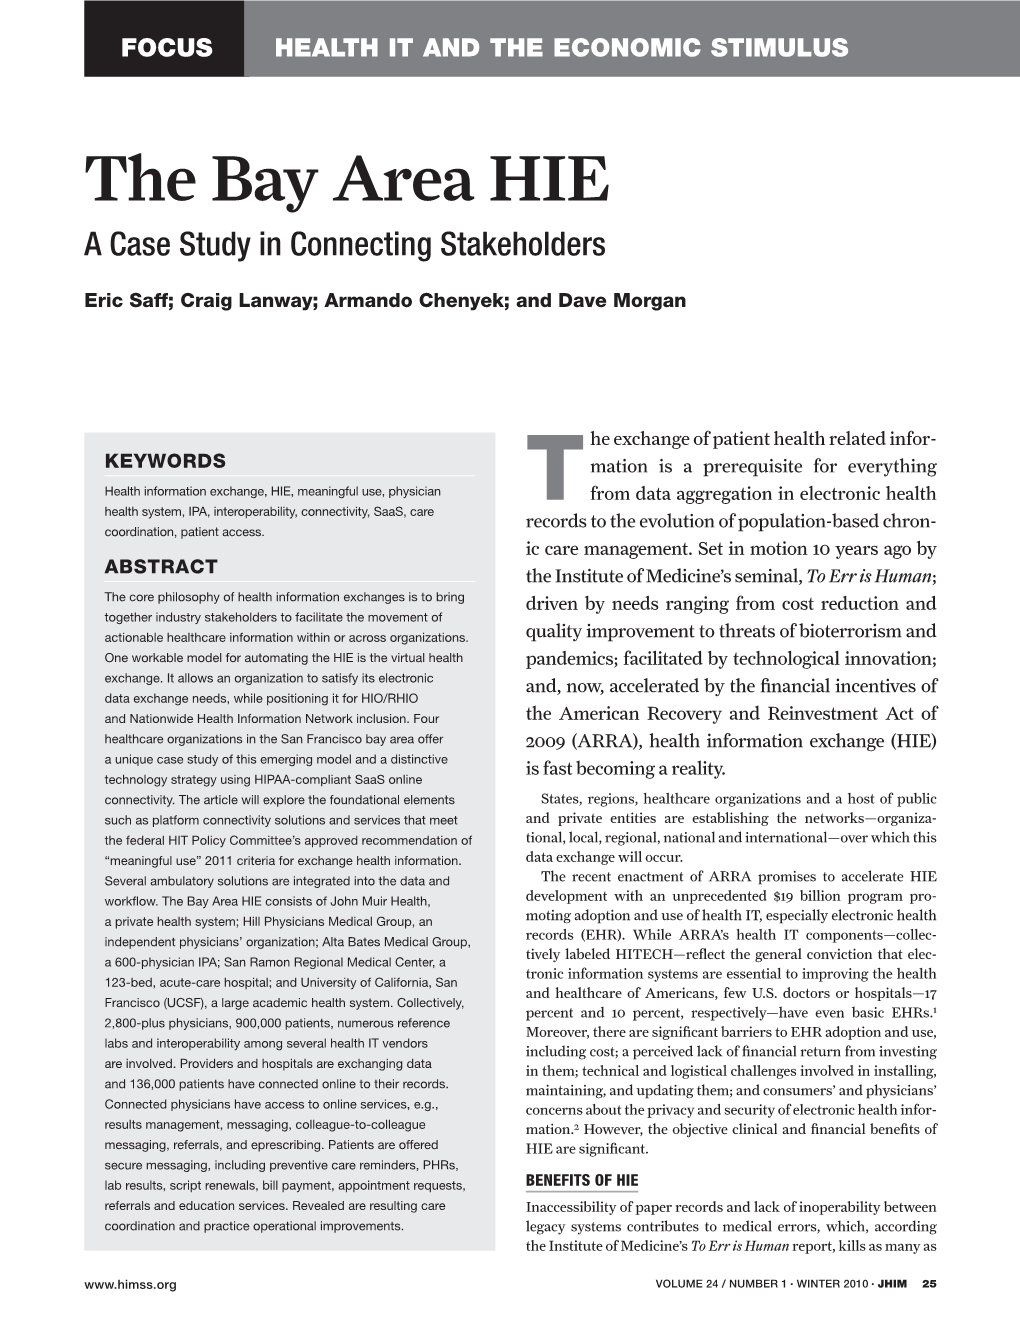 The Bay Area HIE a Case Study in Connecting Stakeholders